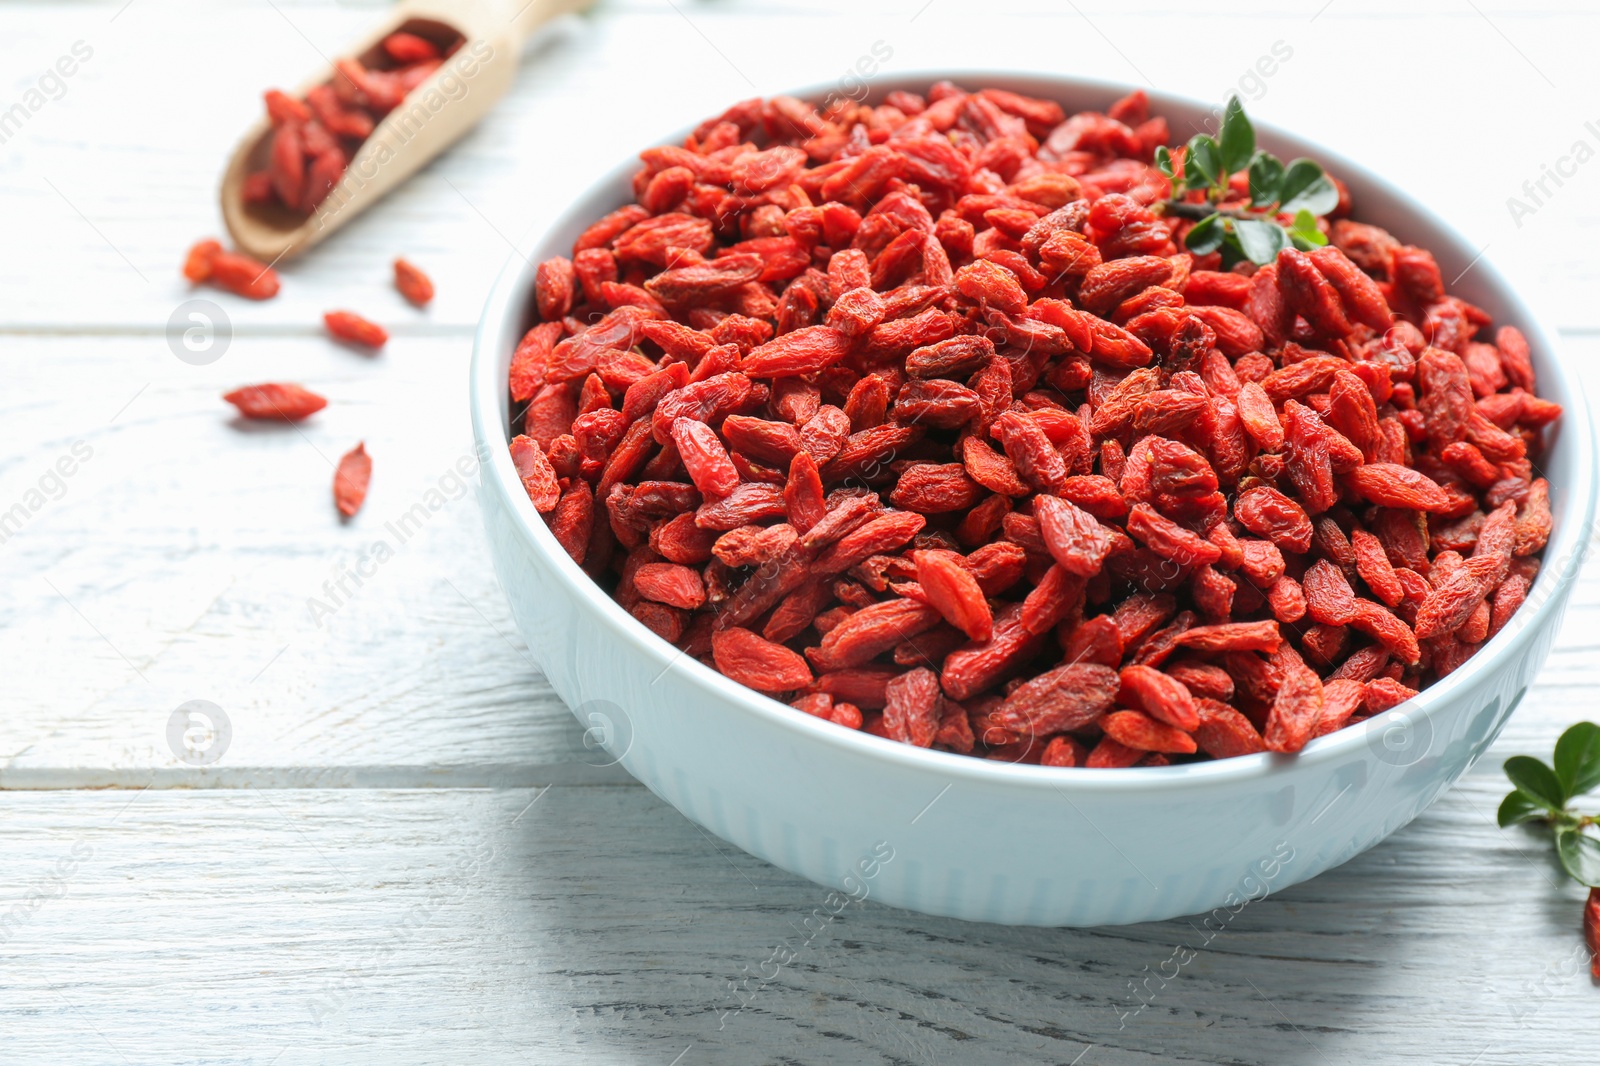 Photo of Bowl of dried goji berries on white wooden table, closeup. Healthy superfood